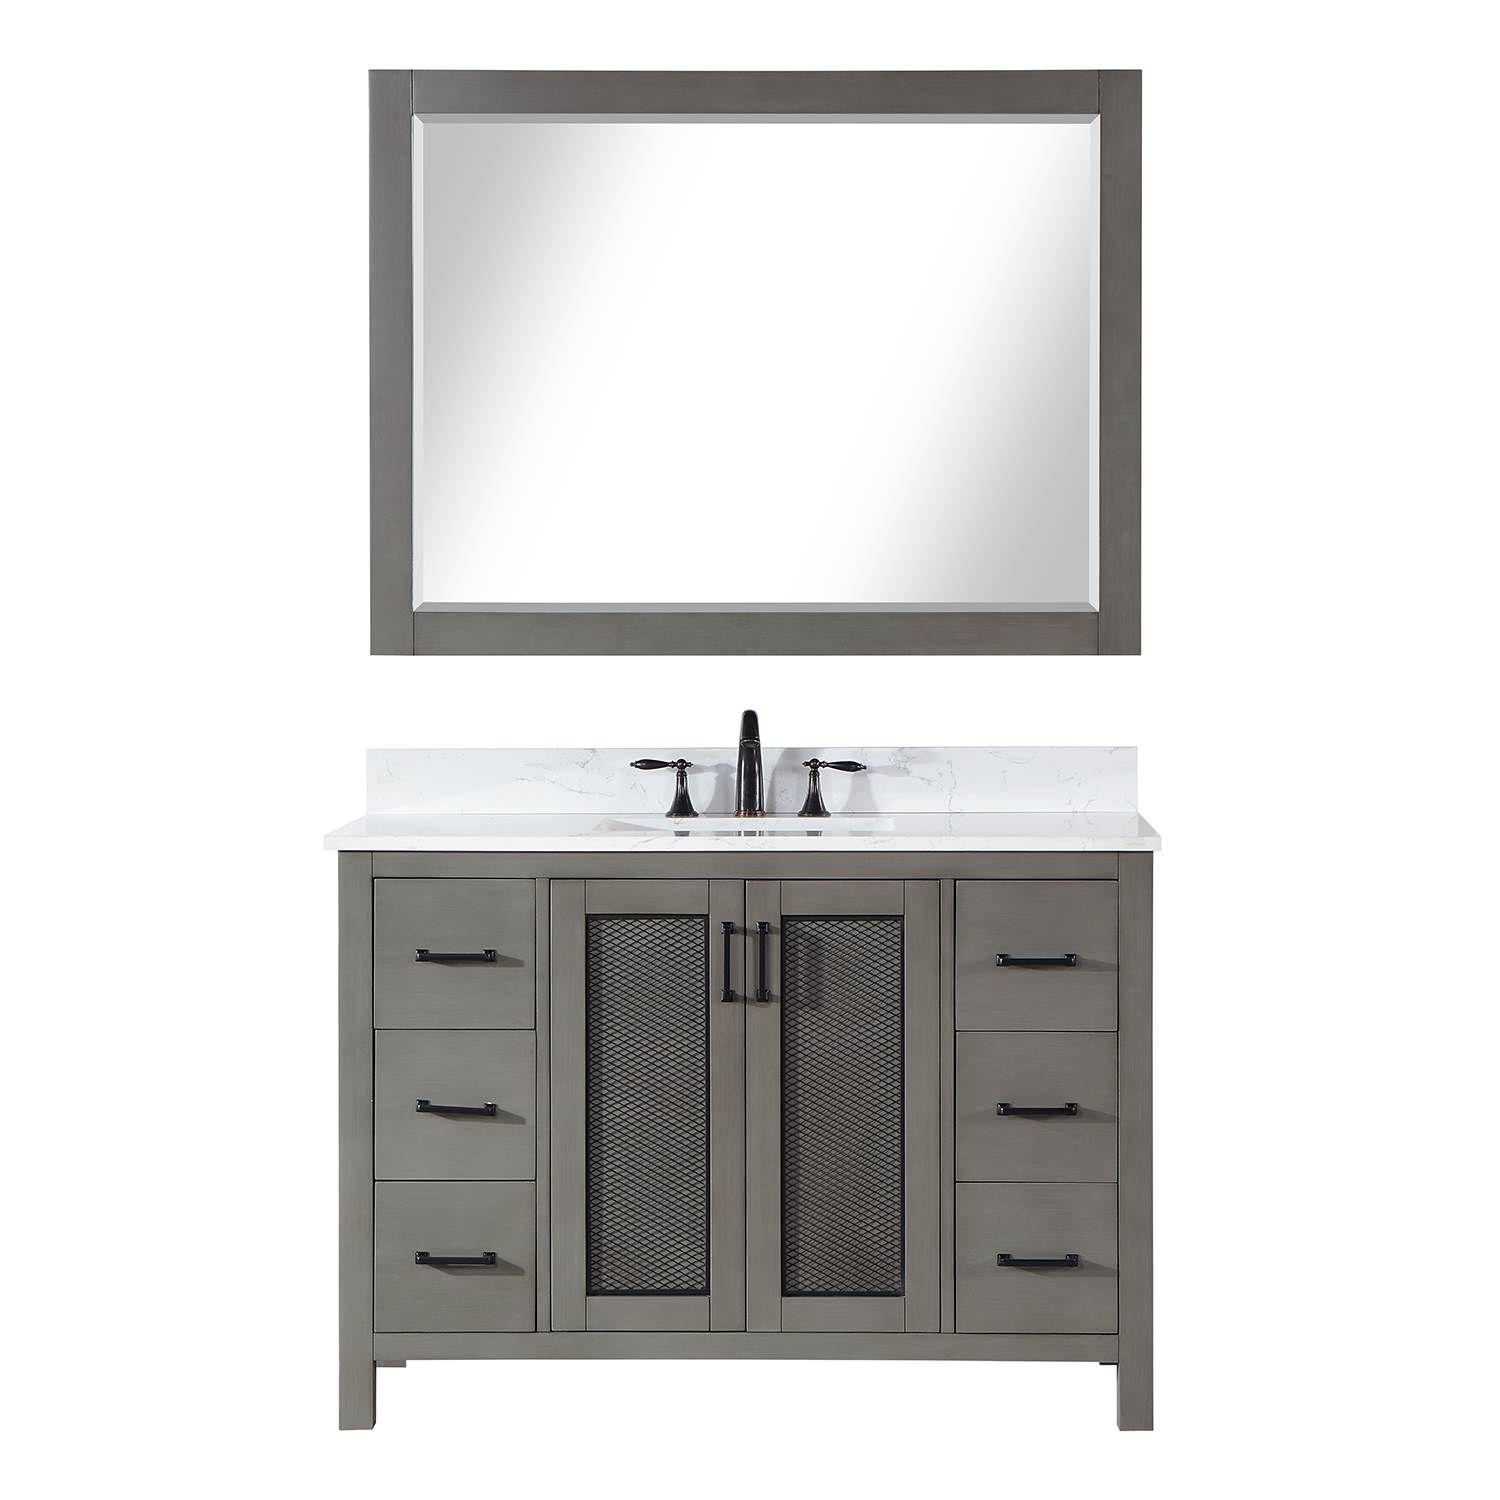 Issac Edwards Collection 48" Single Bathroom Vanity Set in Gray Pine with Carrara White Composite Stone Countertop without Mirror 